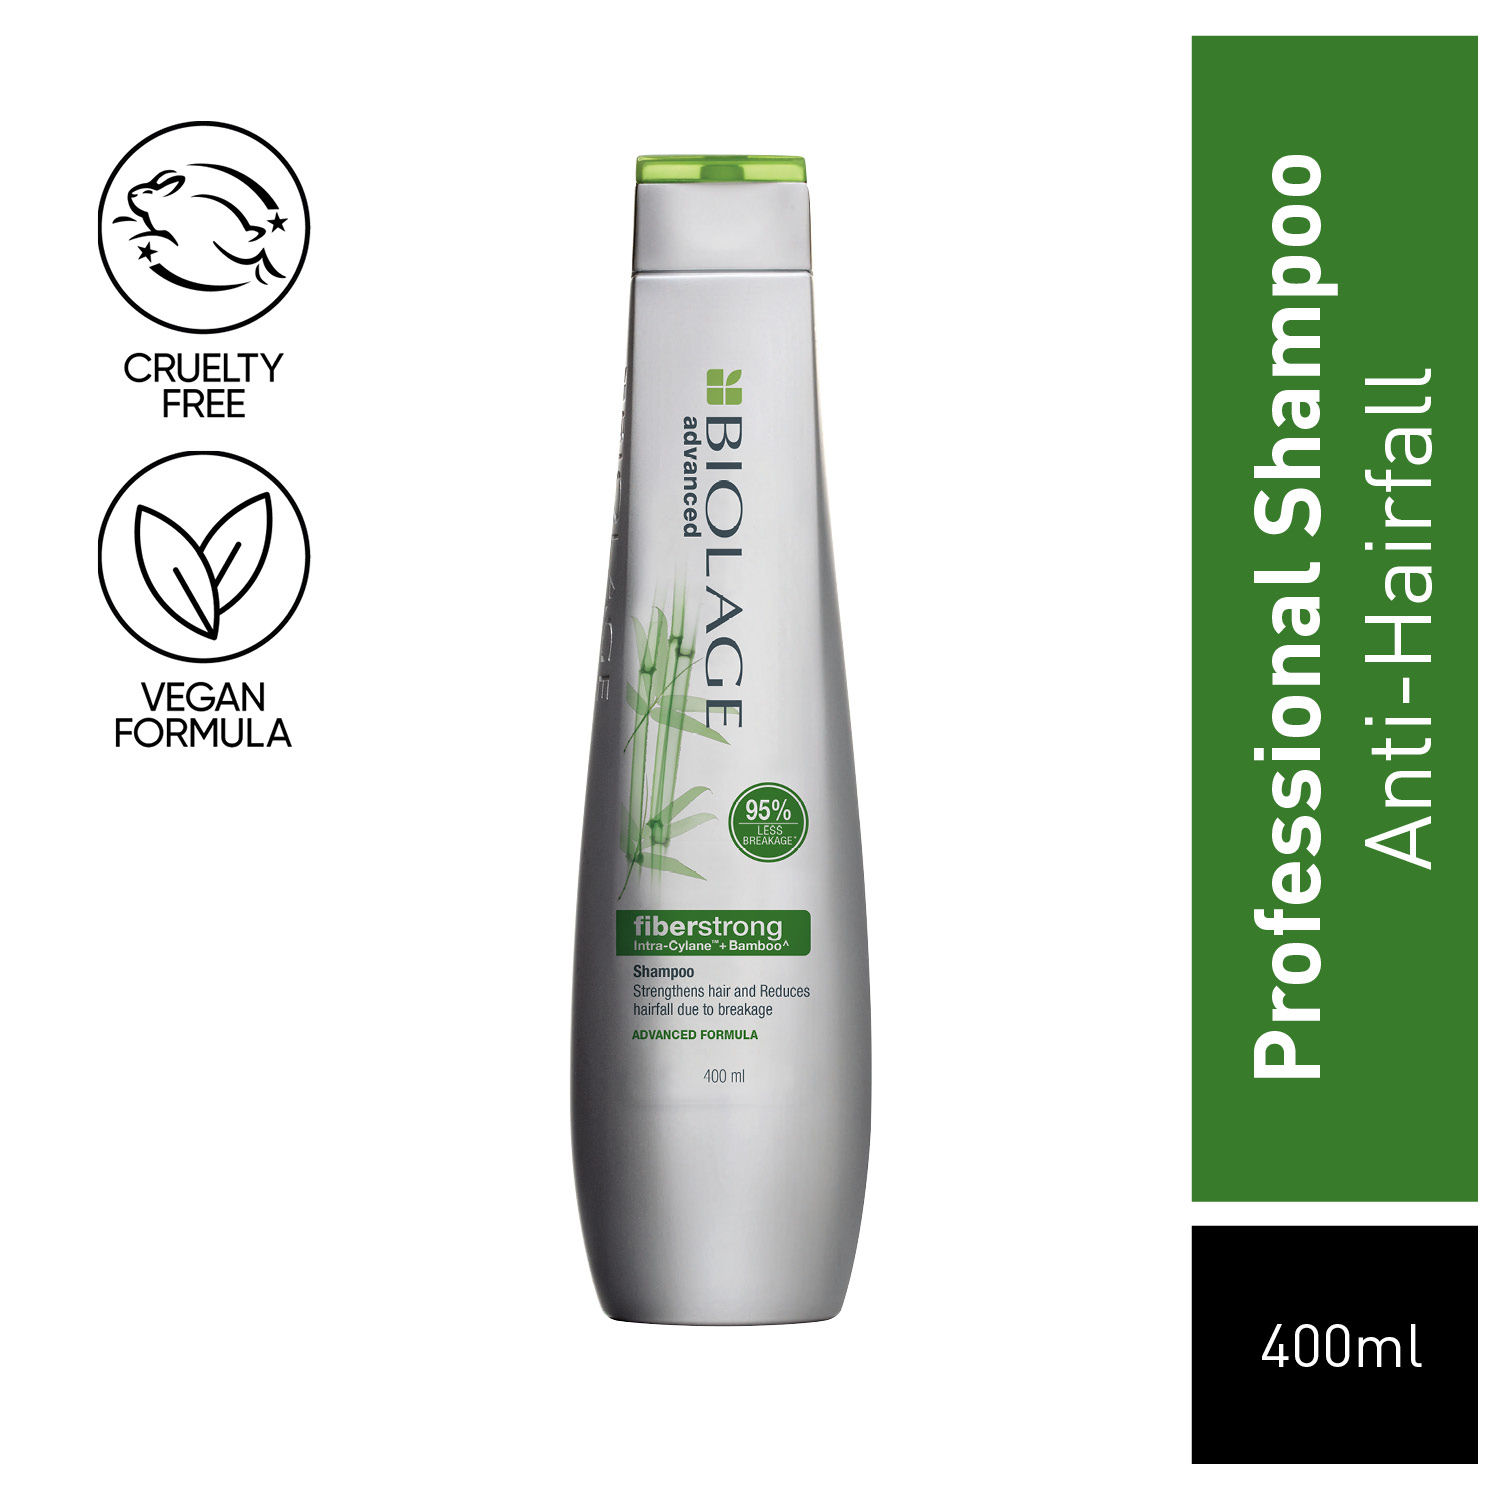 Buy BIOLAGE Advanced Fiberstrong Shampoo 400ml| Paraben free|Reinforces Strength & Elasticity | For Hairfall due to hair breakage - Purplle